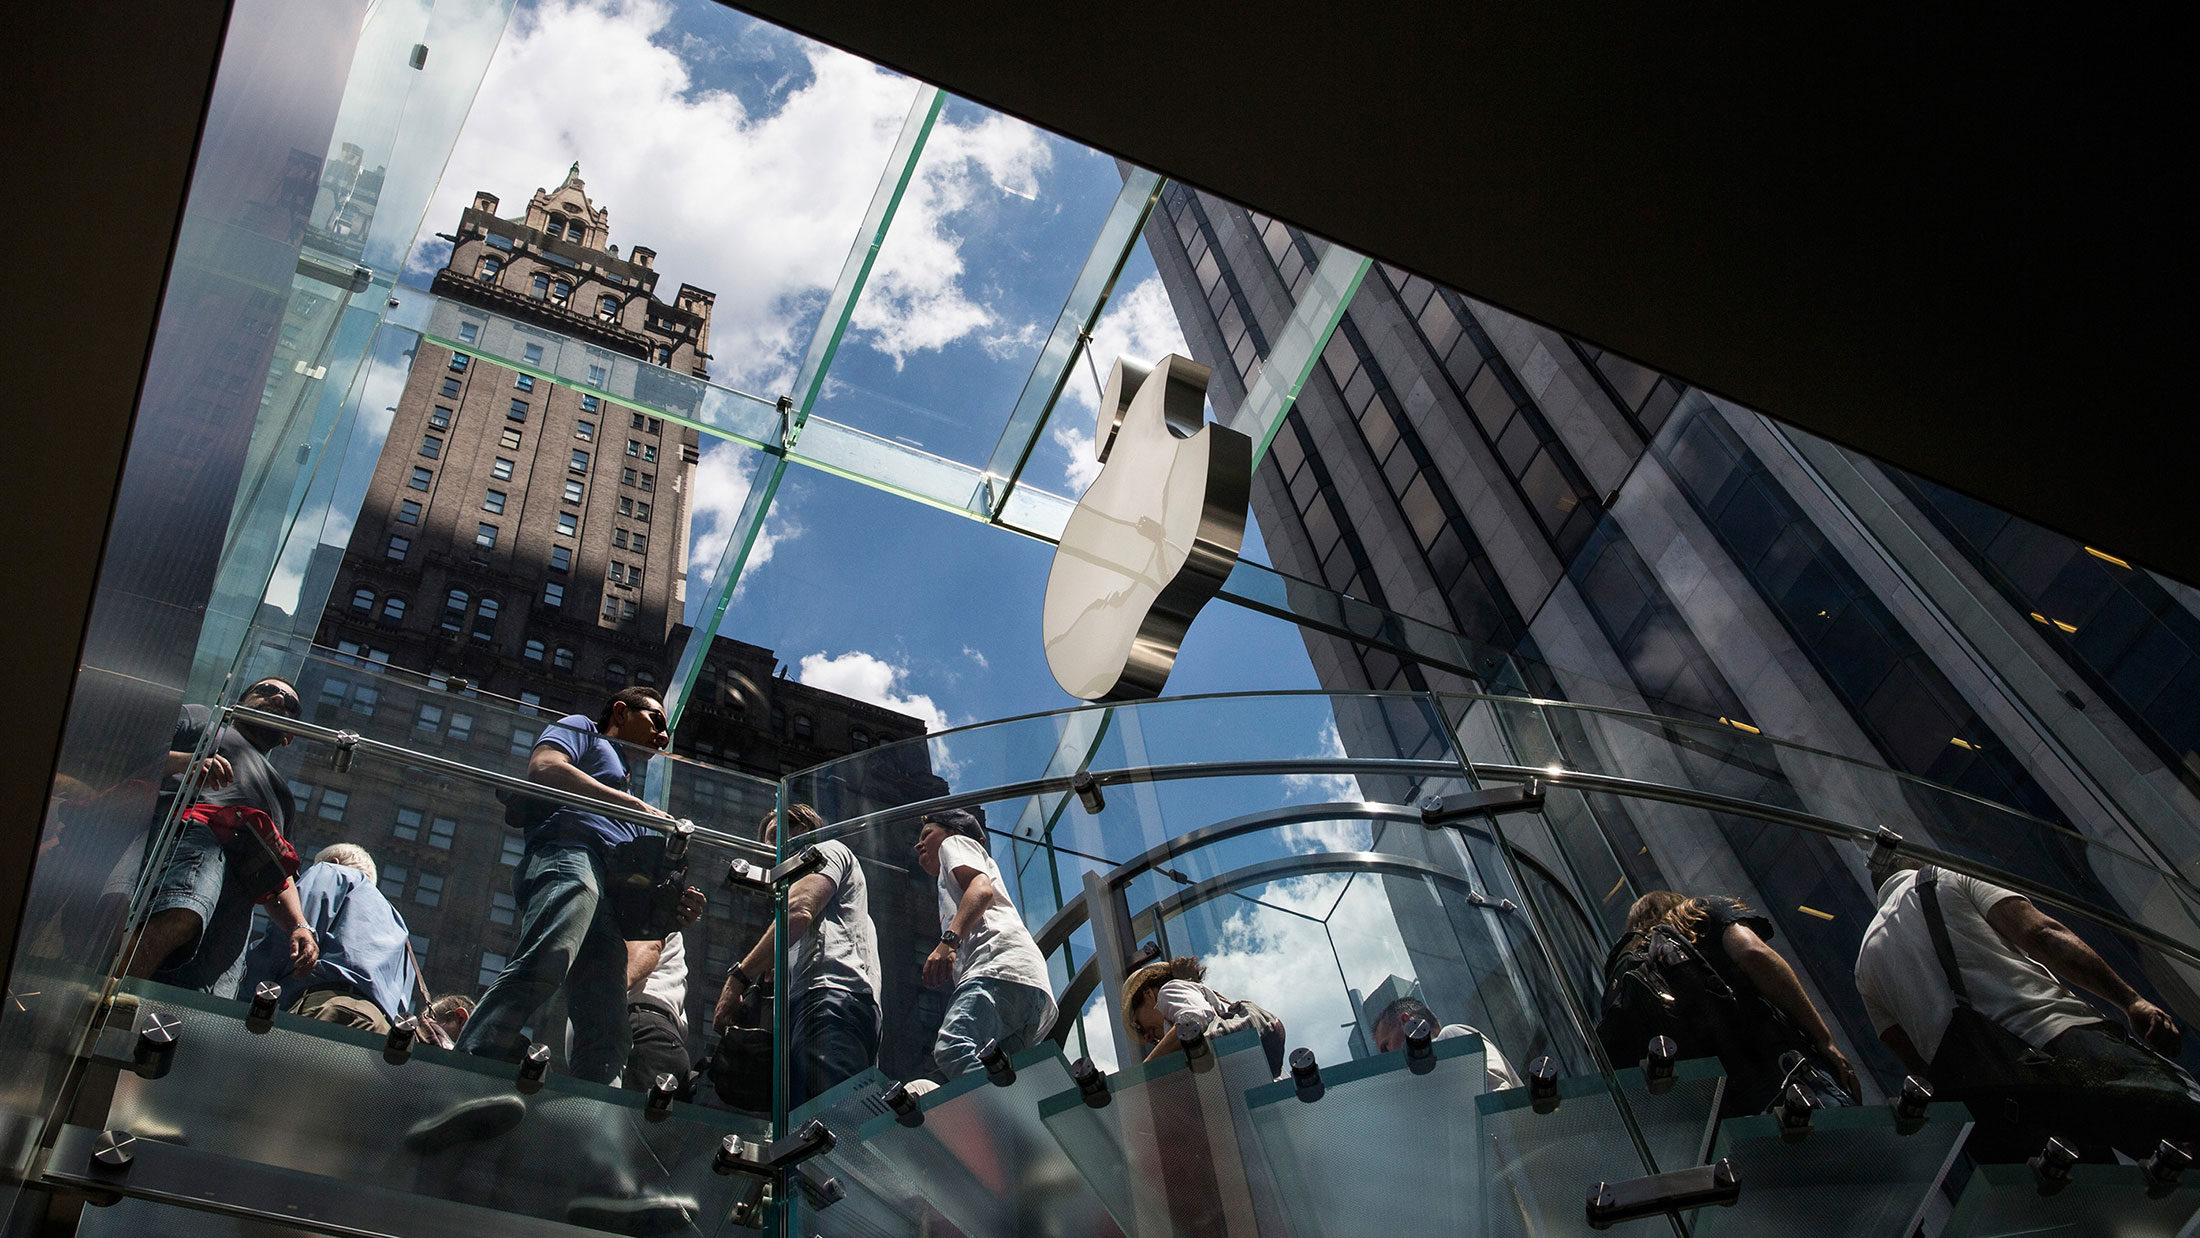 An Apple Inc. store on Aug 5, 2015 in New York City.
